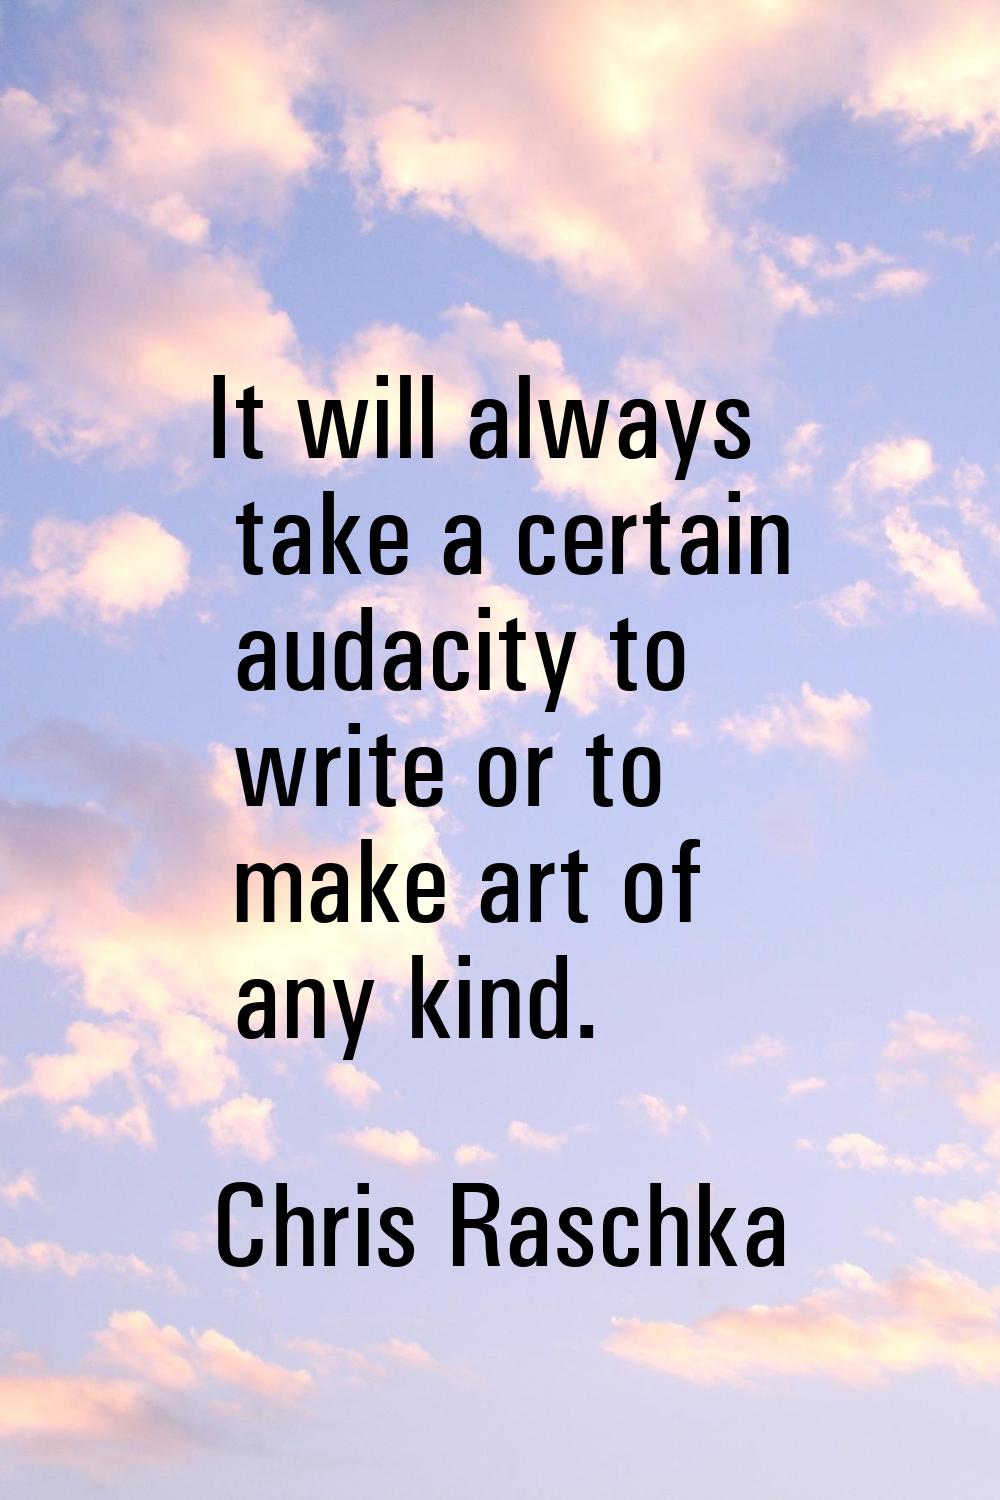 It will always take a certain audacity to write or to make art of any kind.